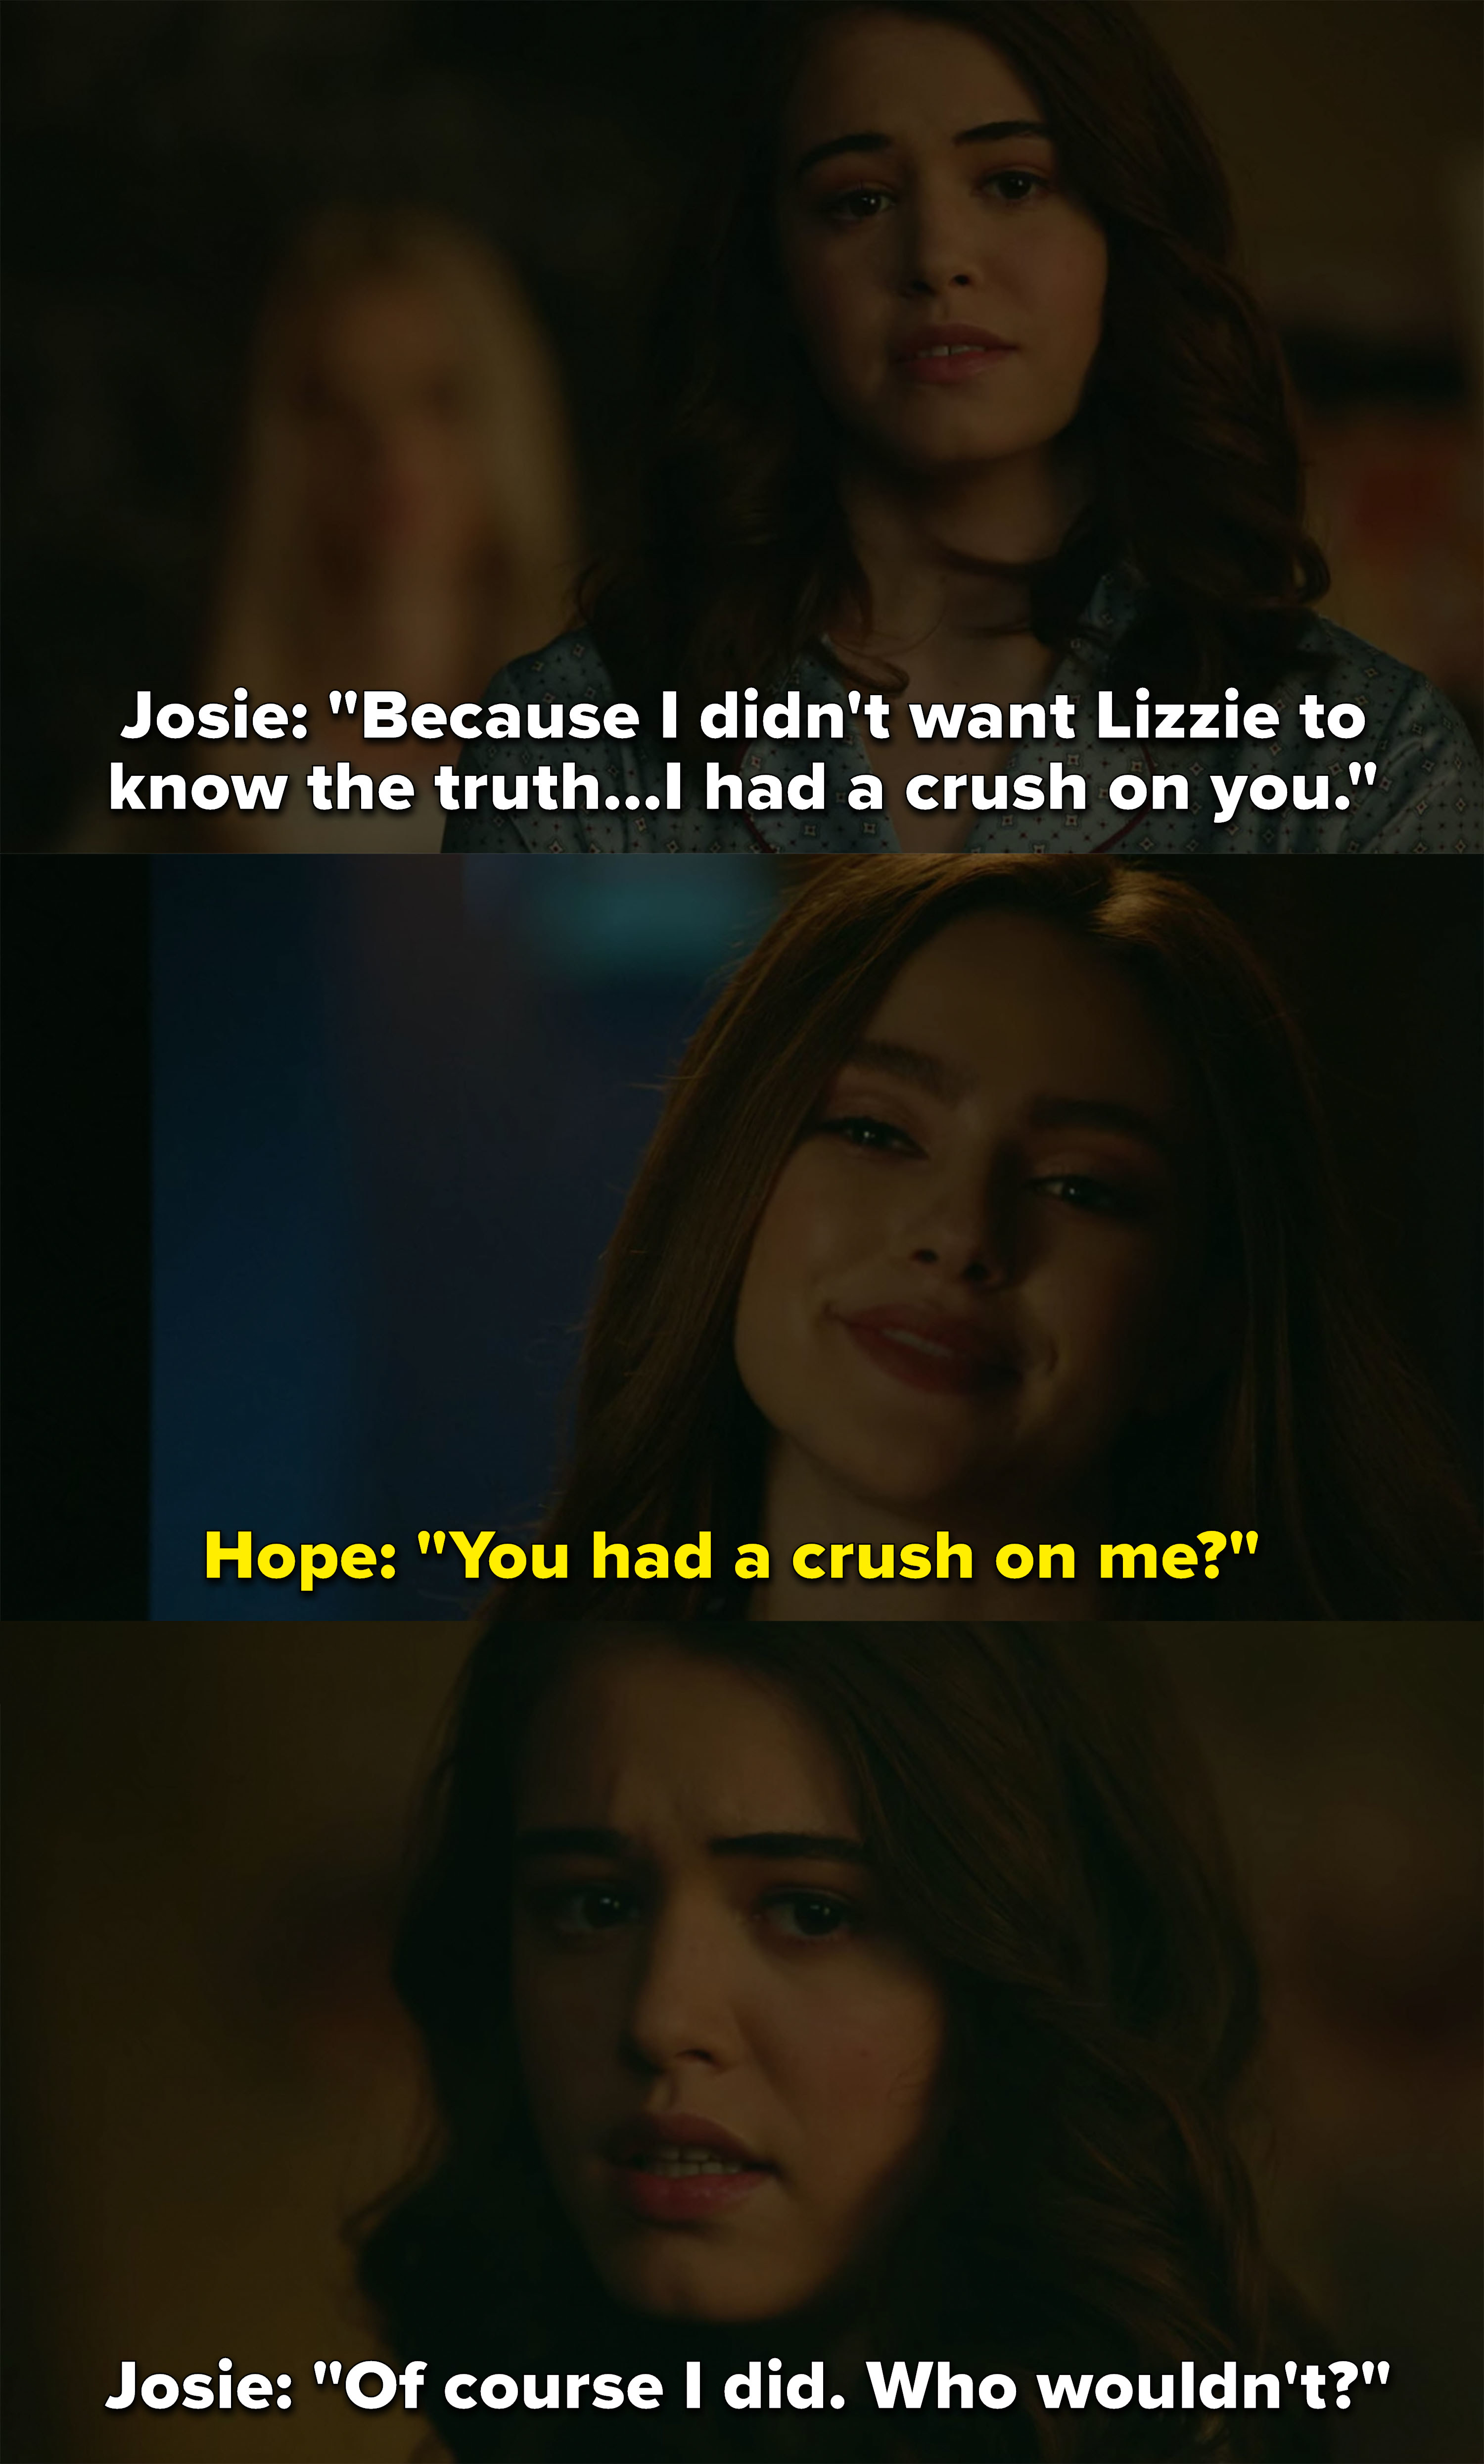 Josie says &quot;of course&quot; she had a crush on Hope and asks, &quot;Who wouldn&#x27;t?&quot;